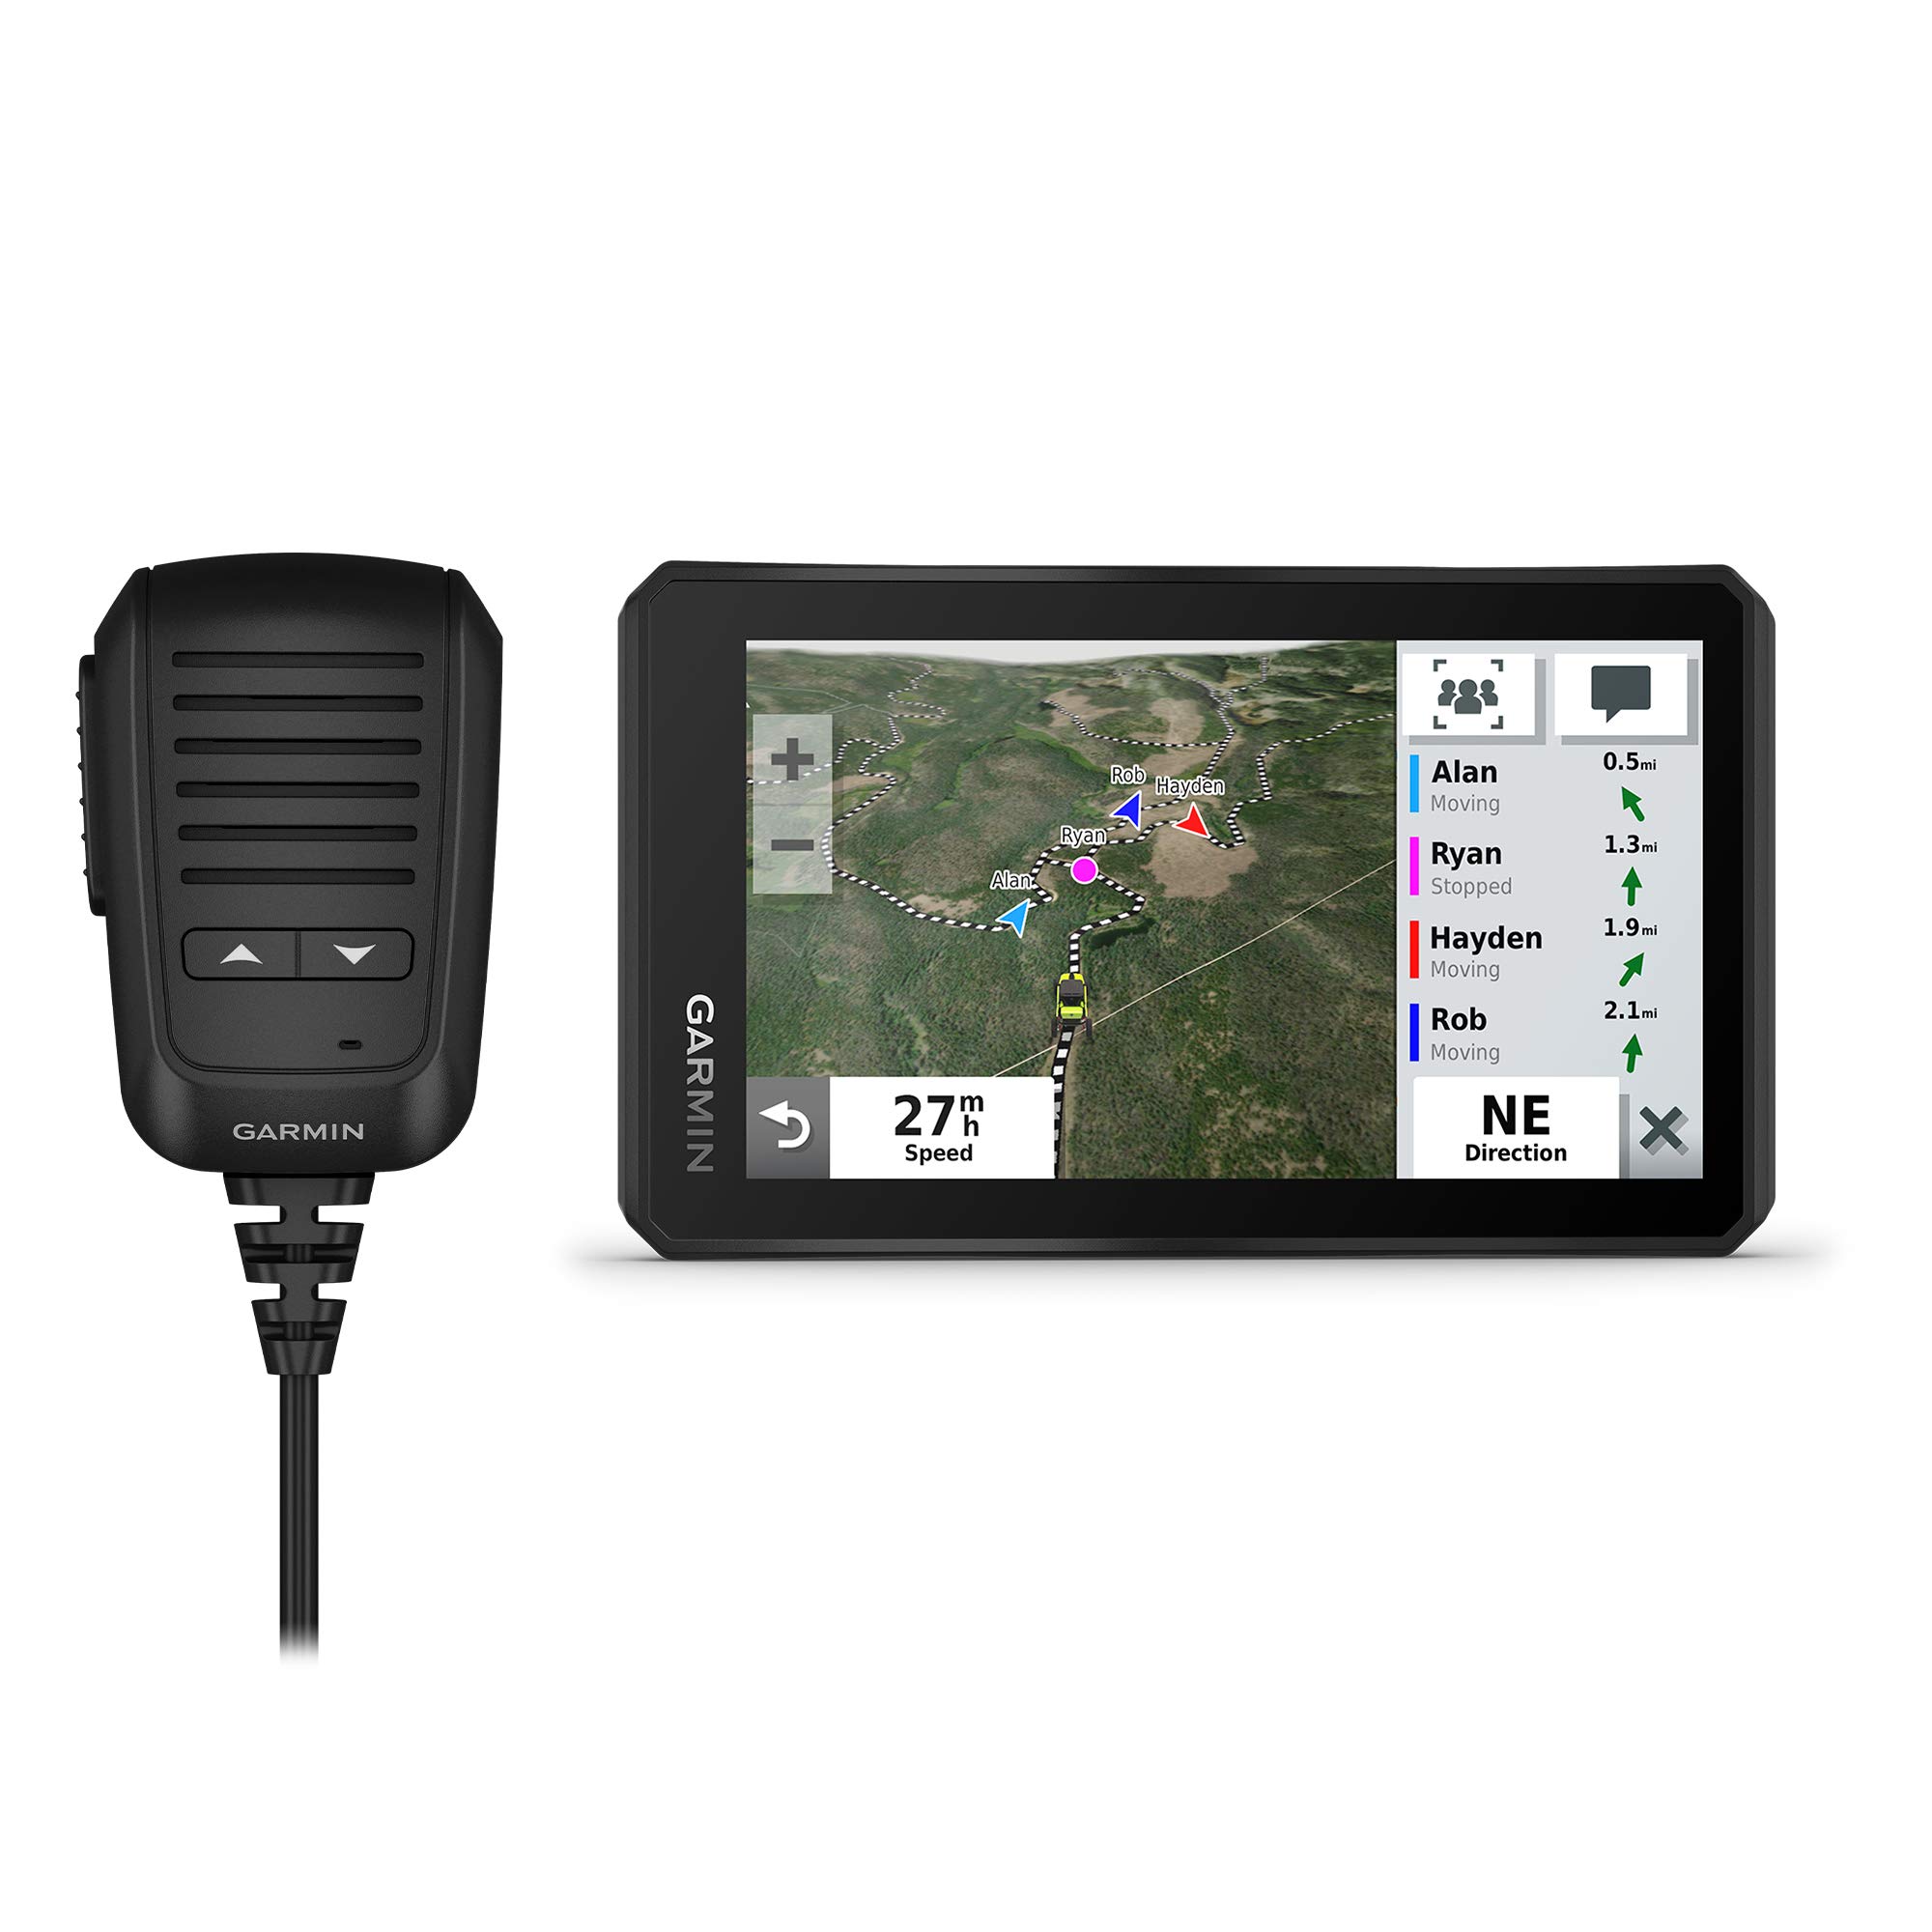 Garmin Tread Powersport Off-Road Navigator with Group Ride Radio, Group Tracking and Voice Communication, 5.5